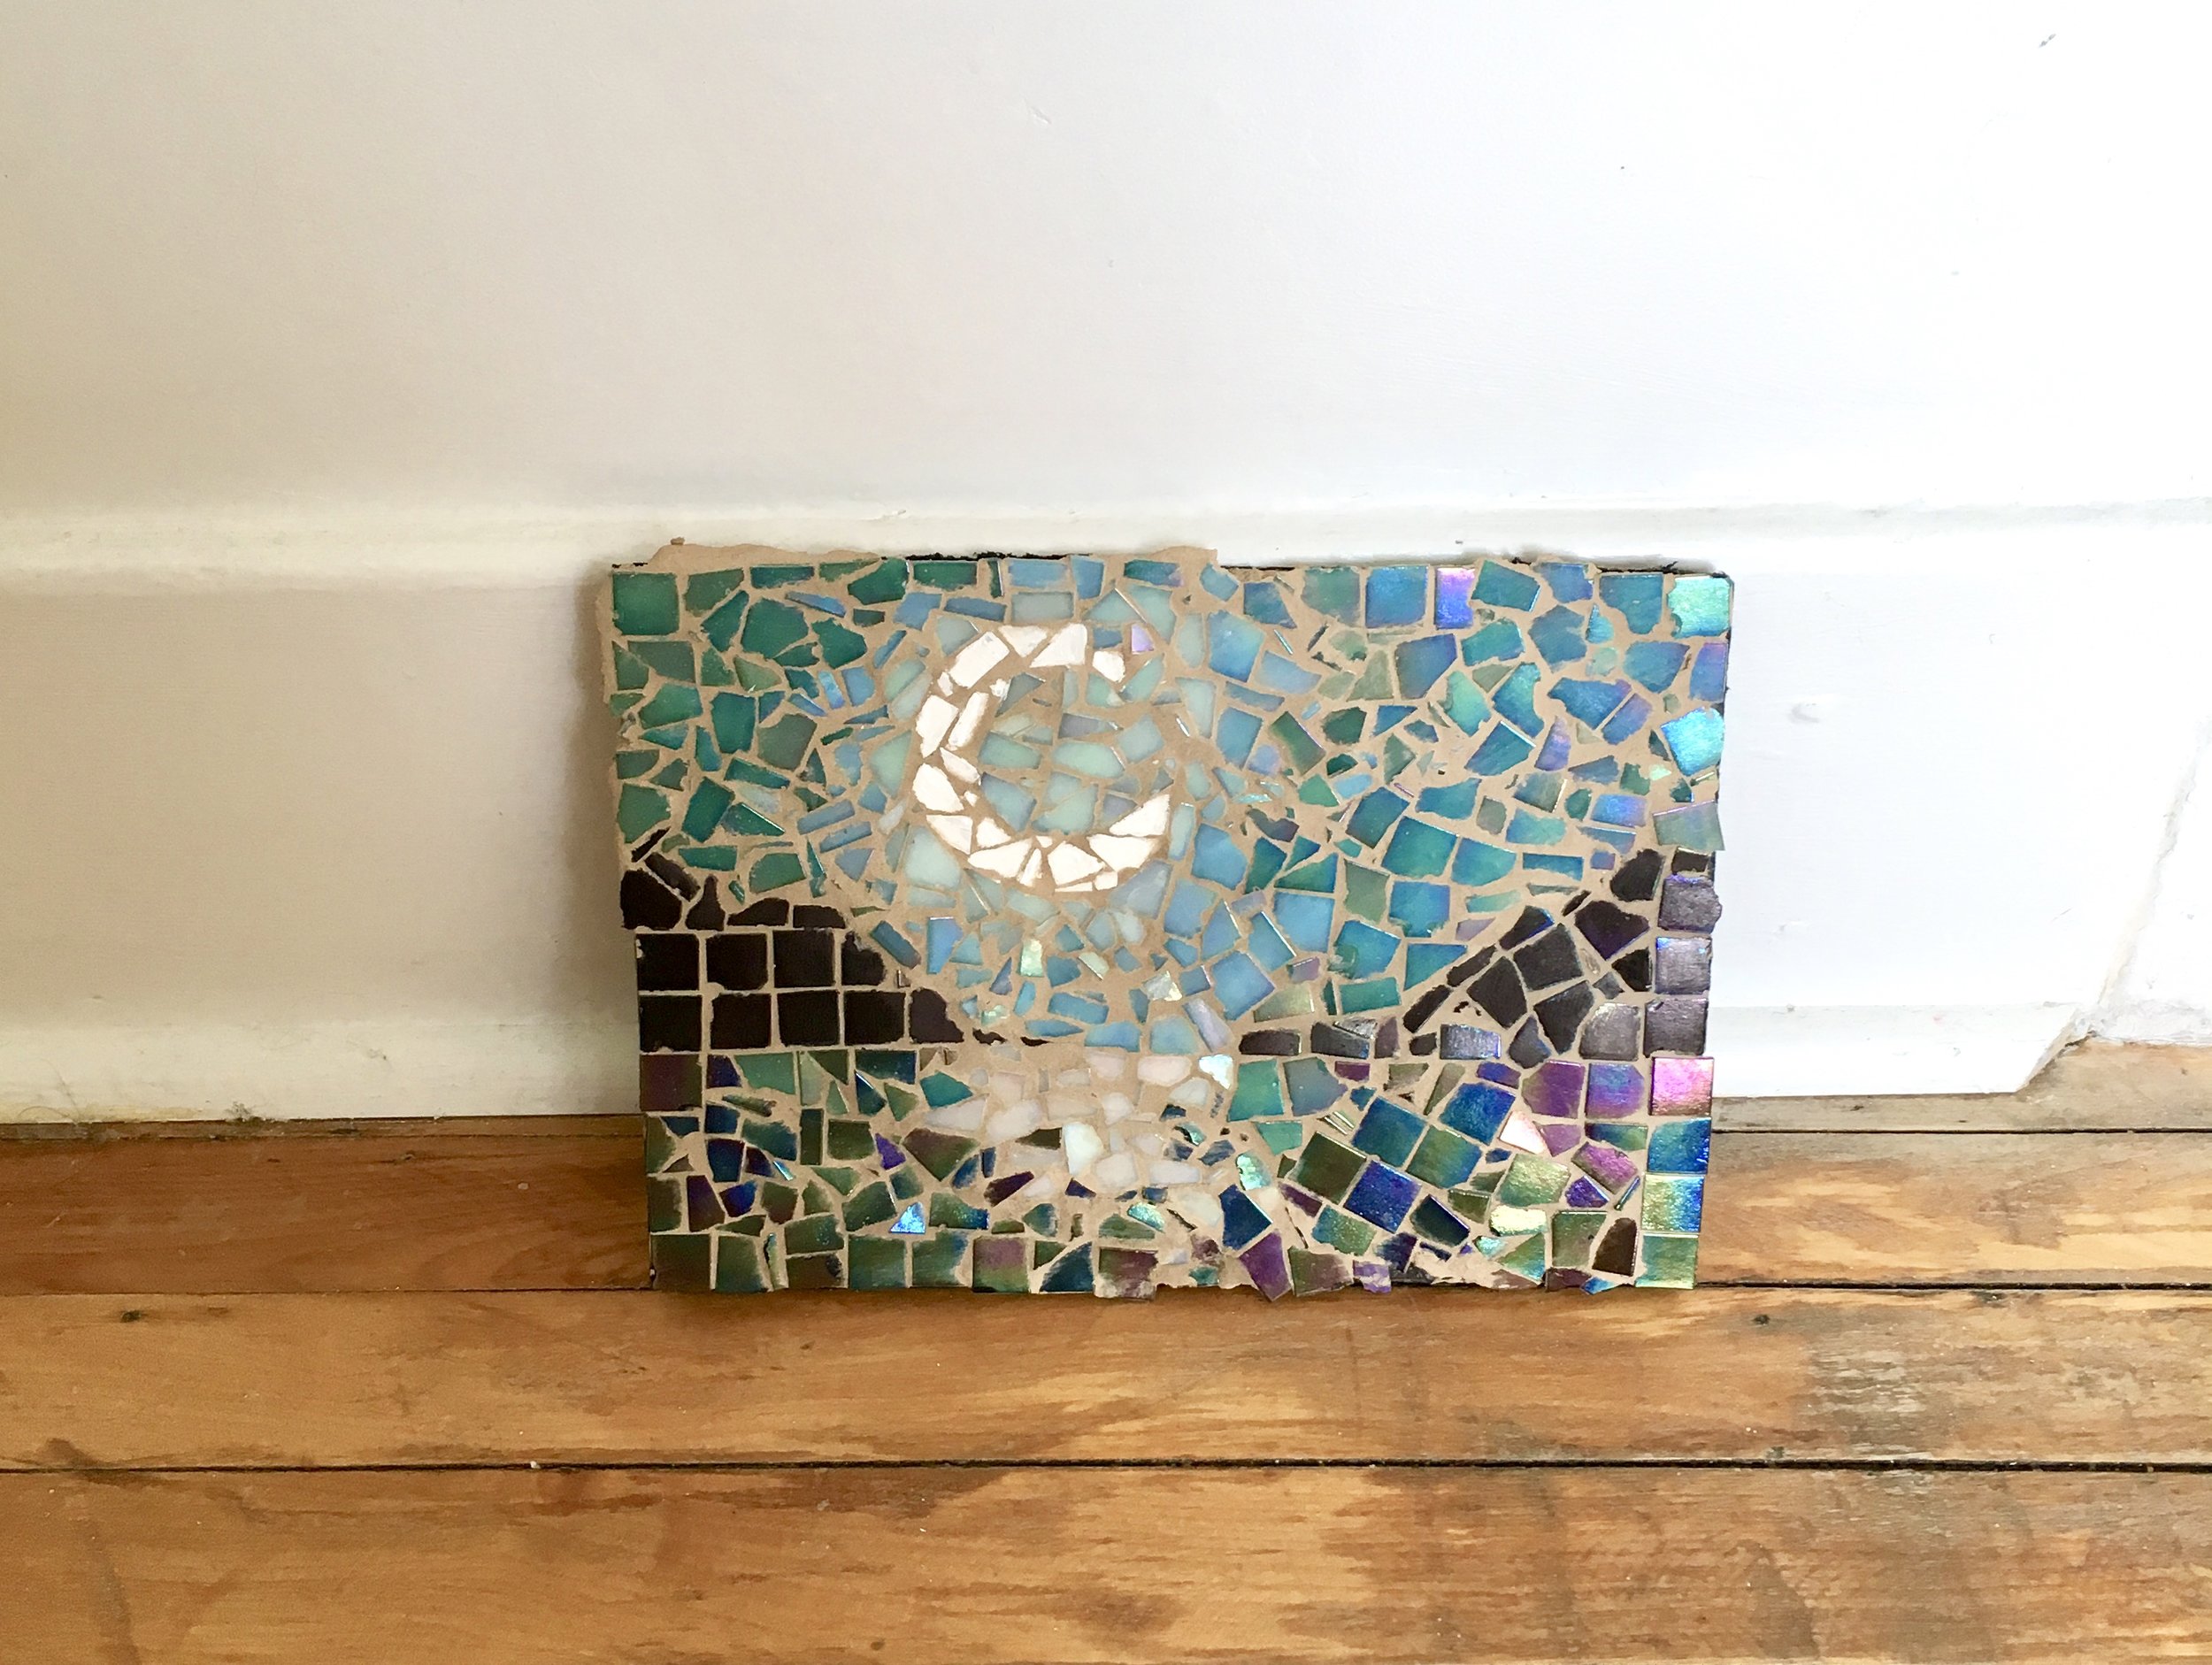 How to Design and Build a Mosaic - News